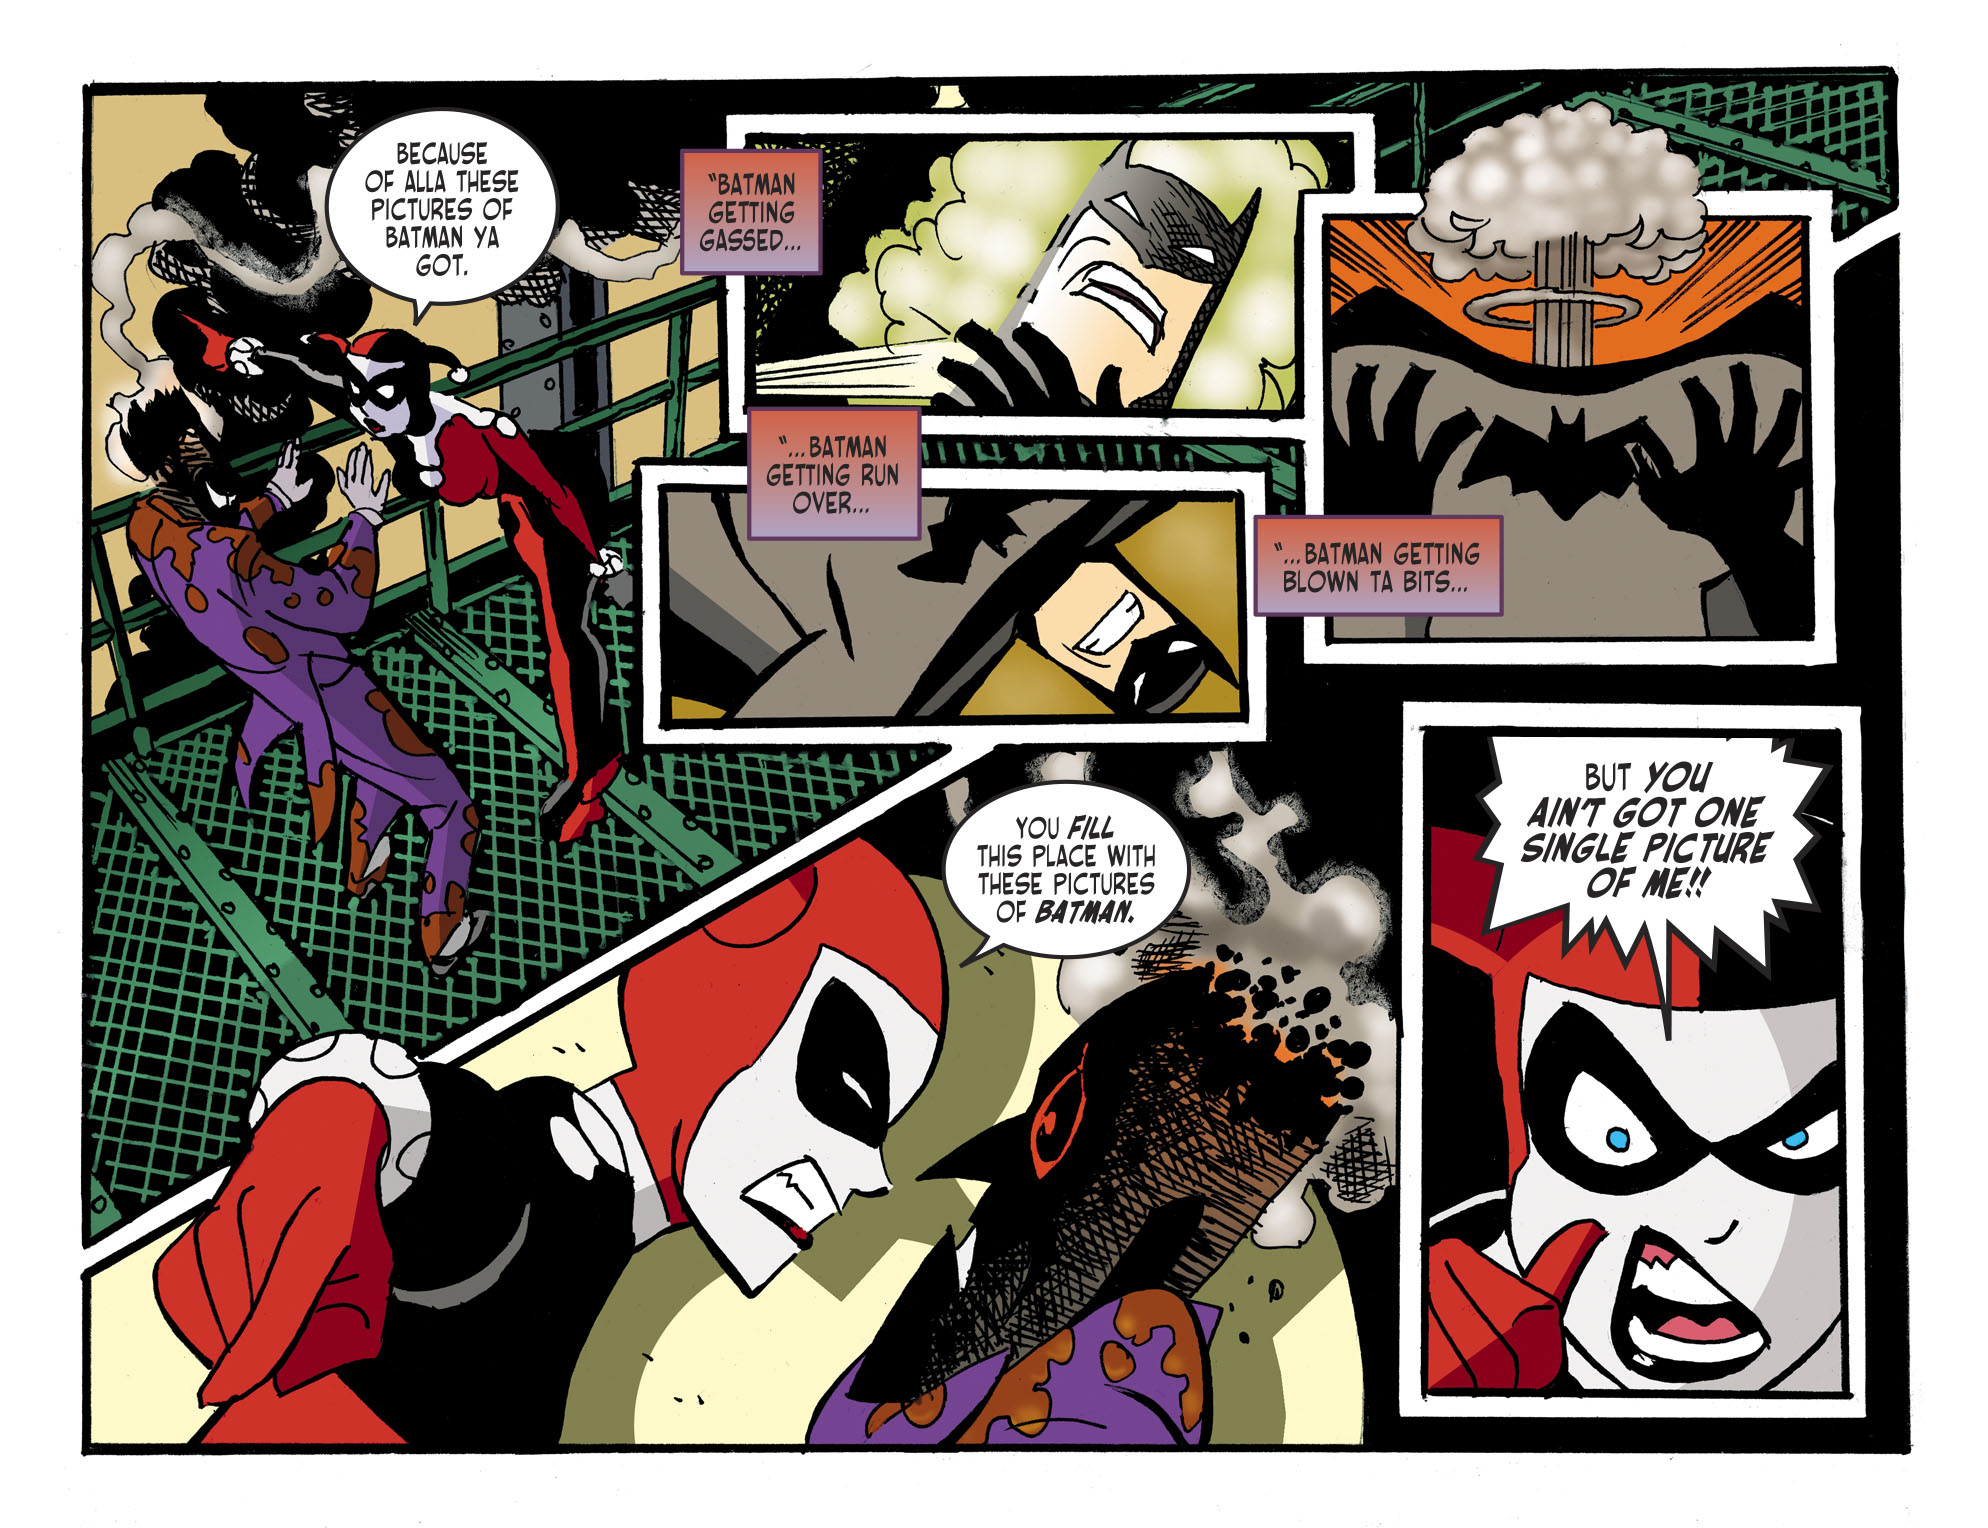 In The New Harley Quinn And Batman Comic, Classic Harley Gets An Important, Modern Update